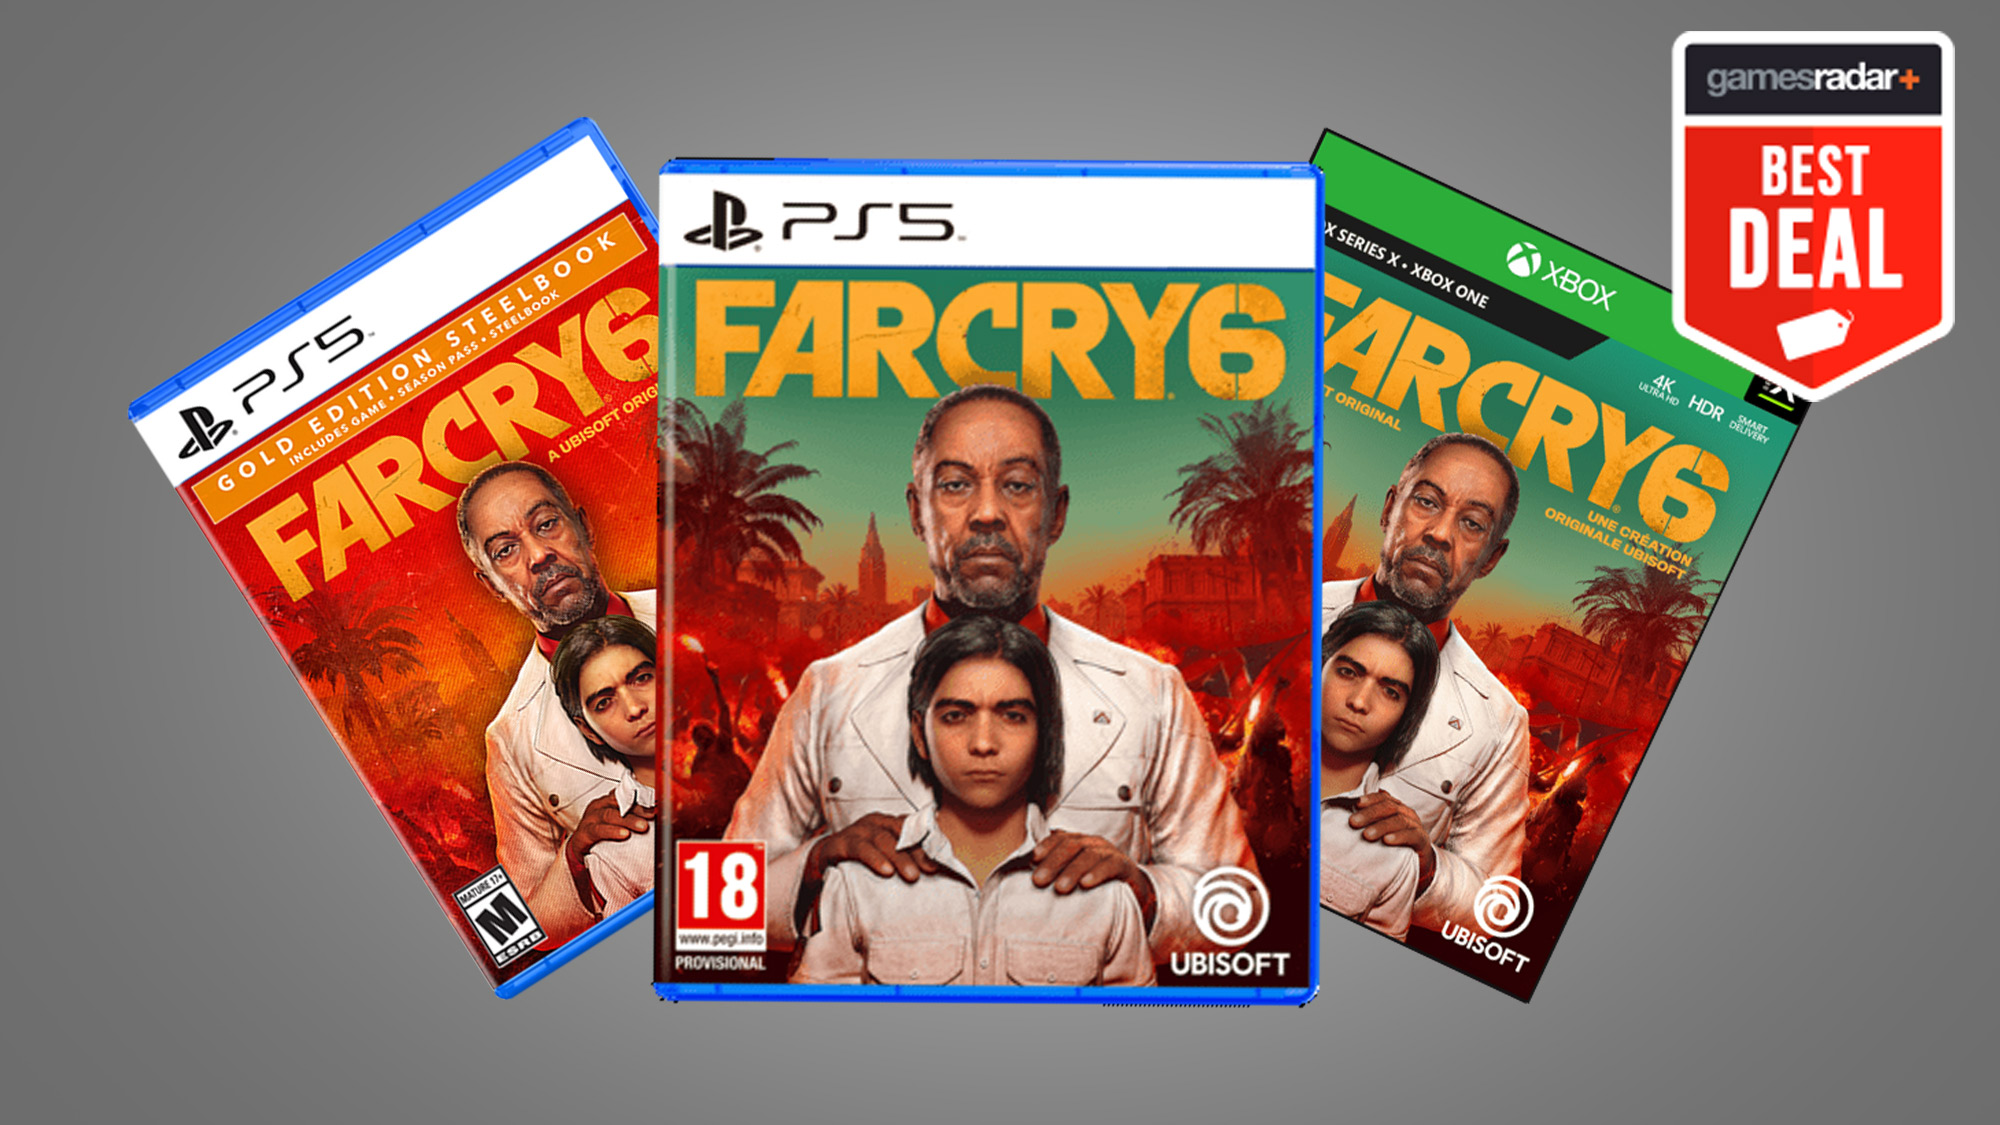 Far Cry 6 is just $20 in this weekend's Xbox Series X and PS5 deals |  GamesRadar+